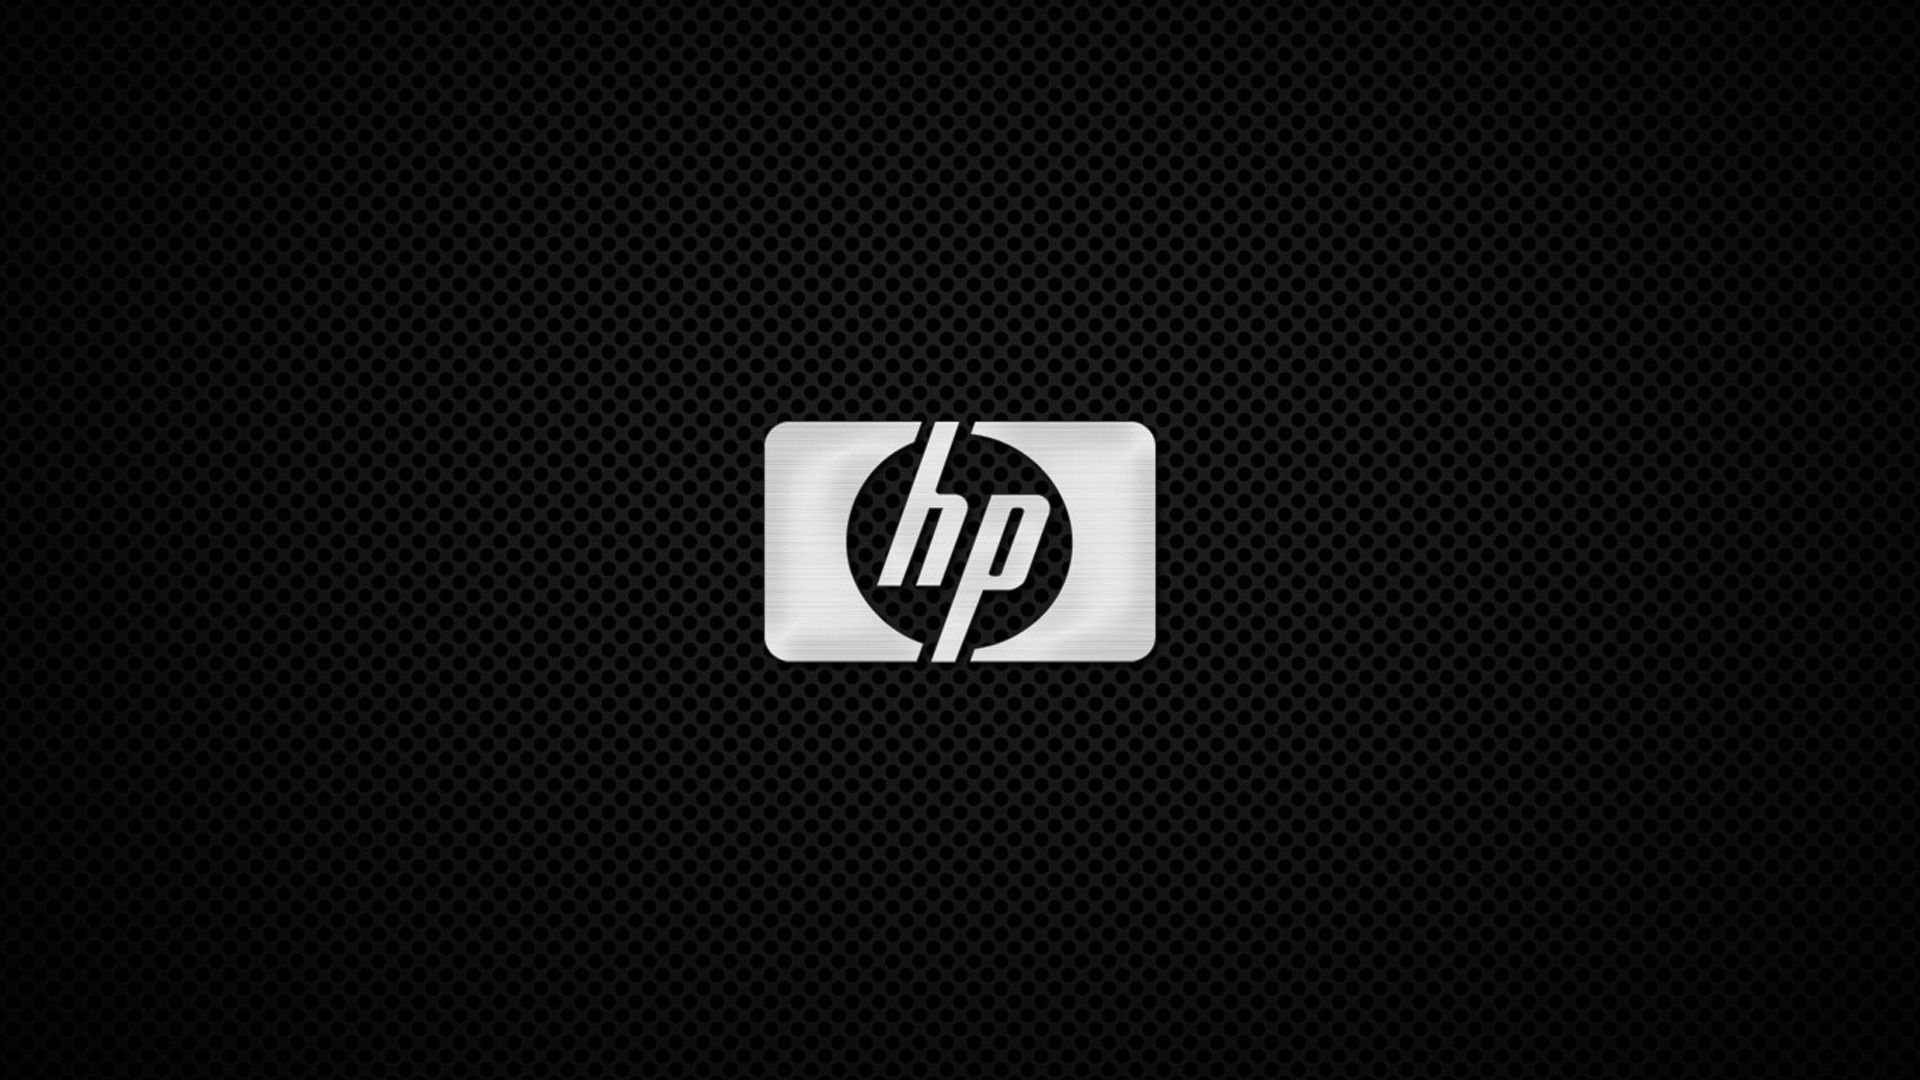 HP Logo and HQ Wallpapers Full HD Pictures